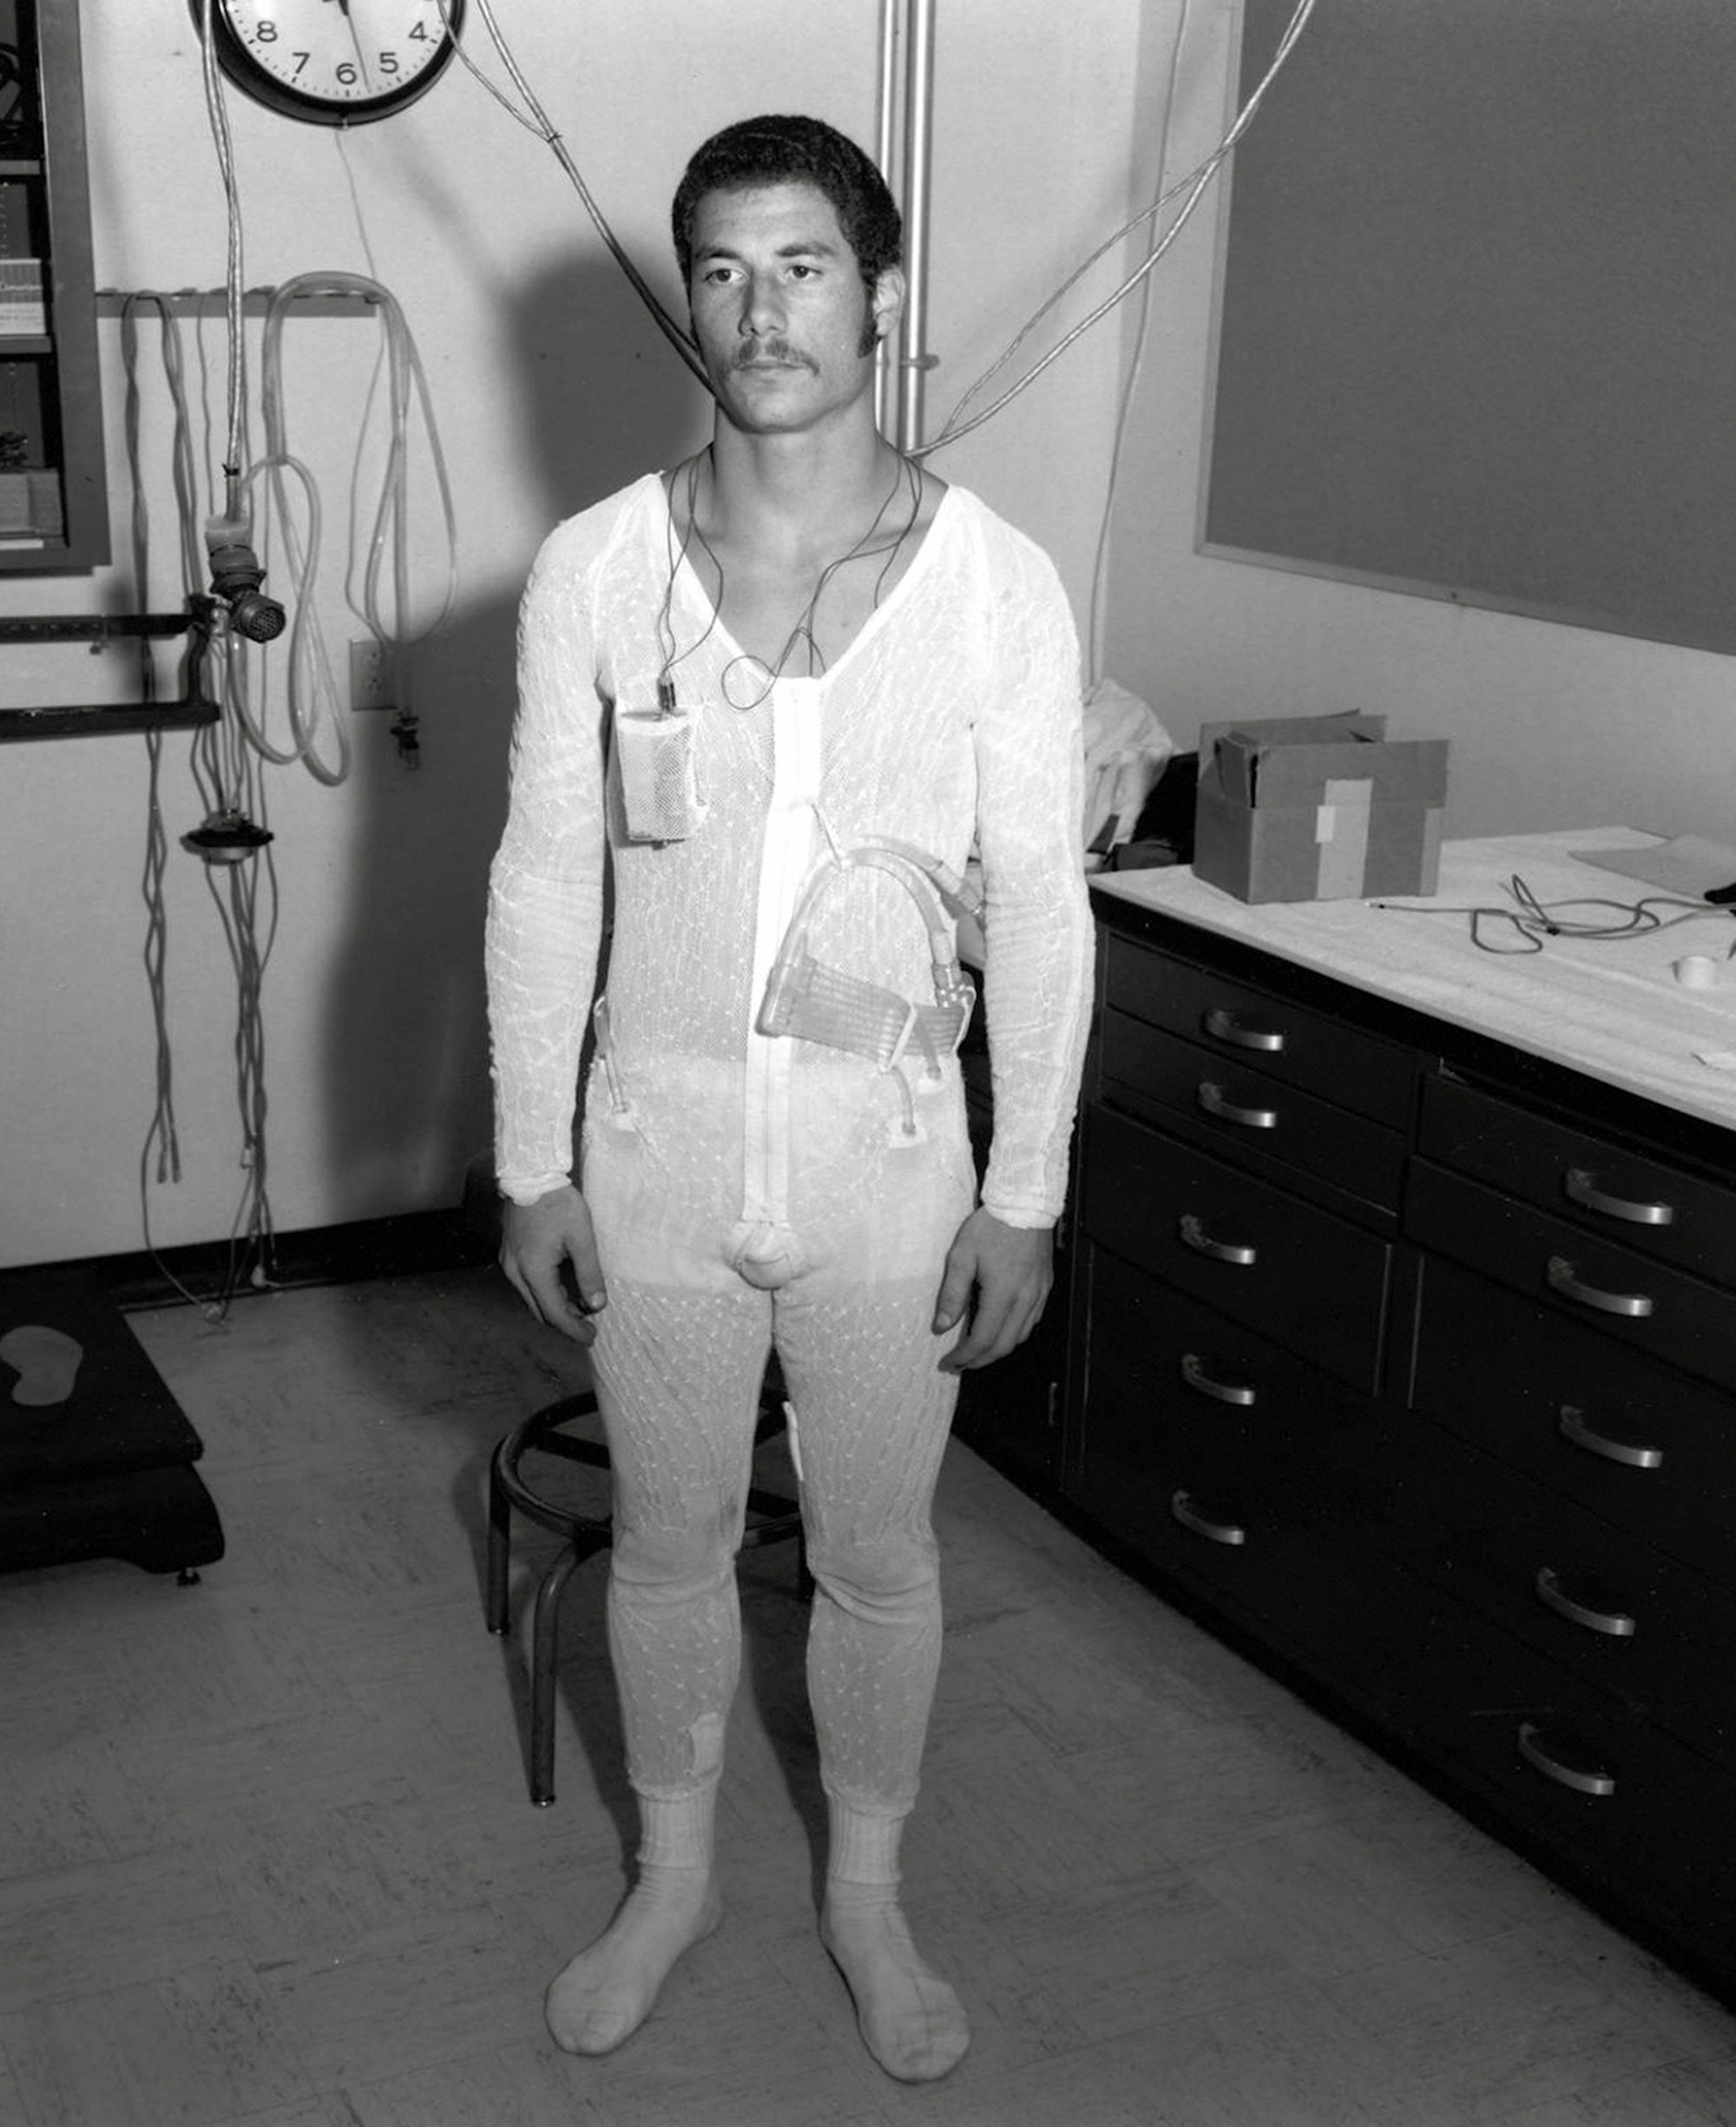 A photograph of a man standing in a white one-piece attached with multiple wires to unidentifiable medical equipment behind him.